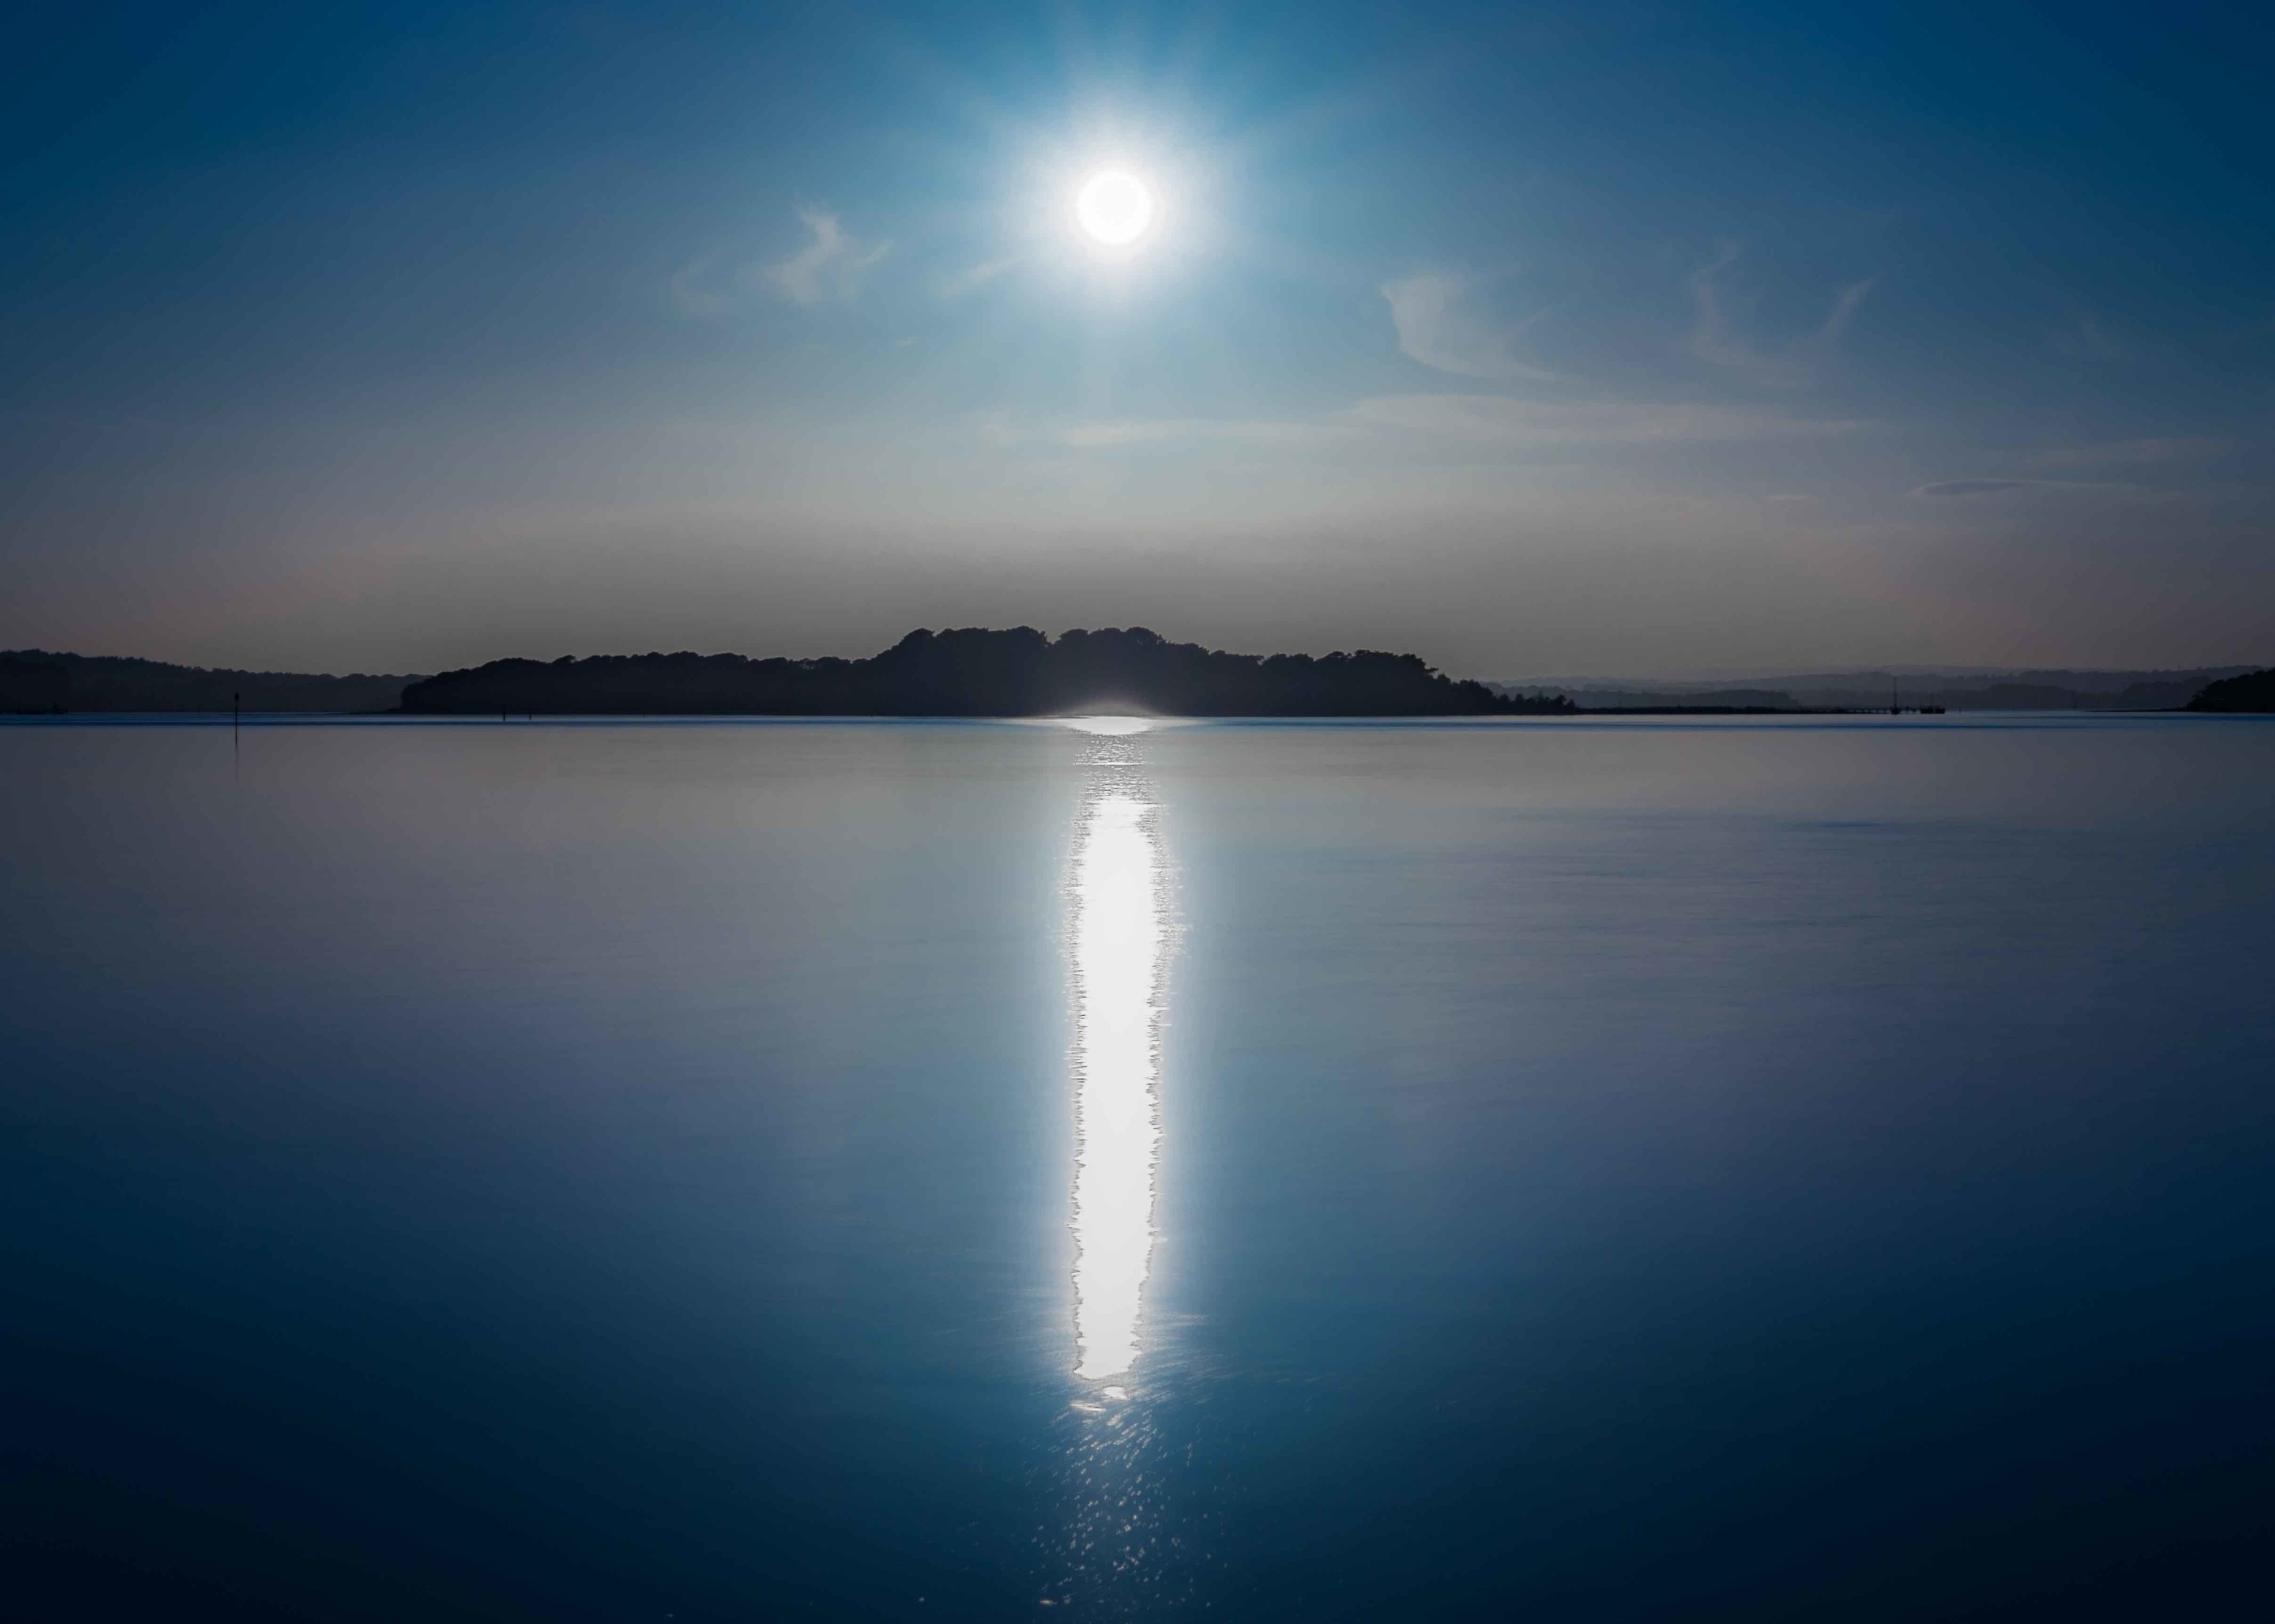 #BVSBlue Sunrise over Poole bay from the Arne peninsula. Titled the photo 'Blue Planet'.